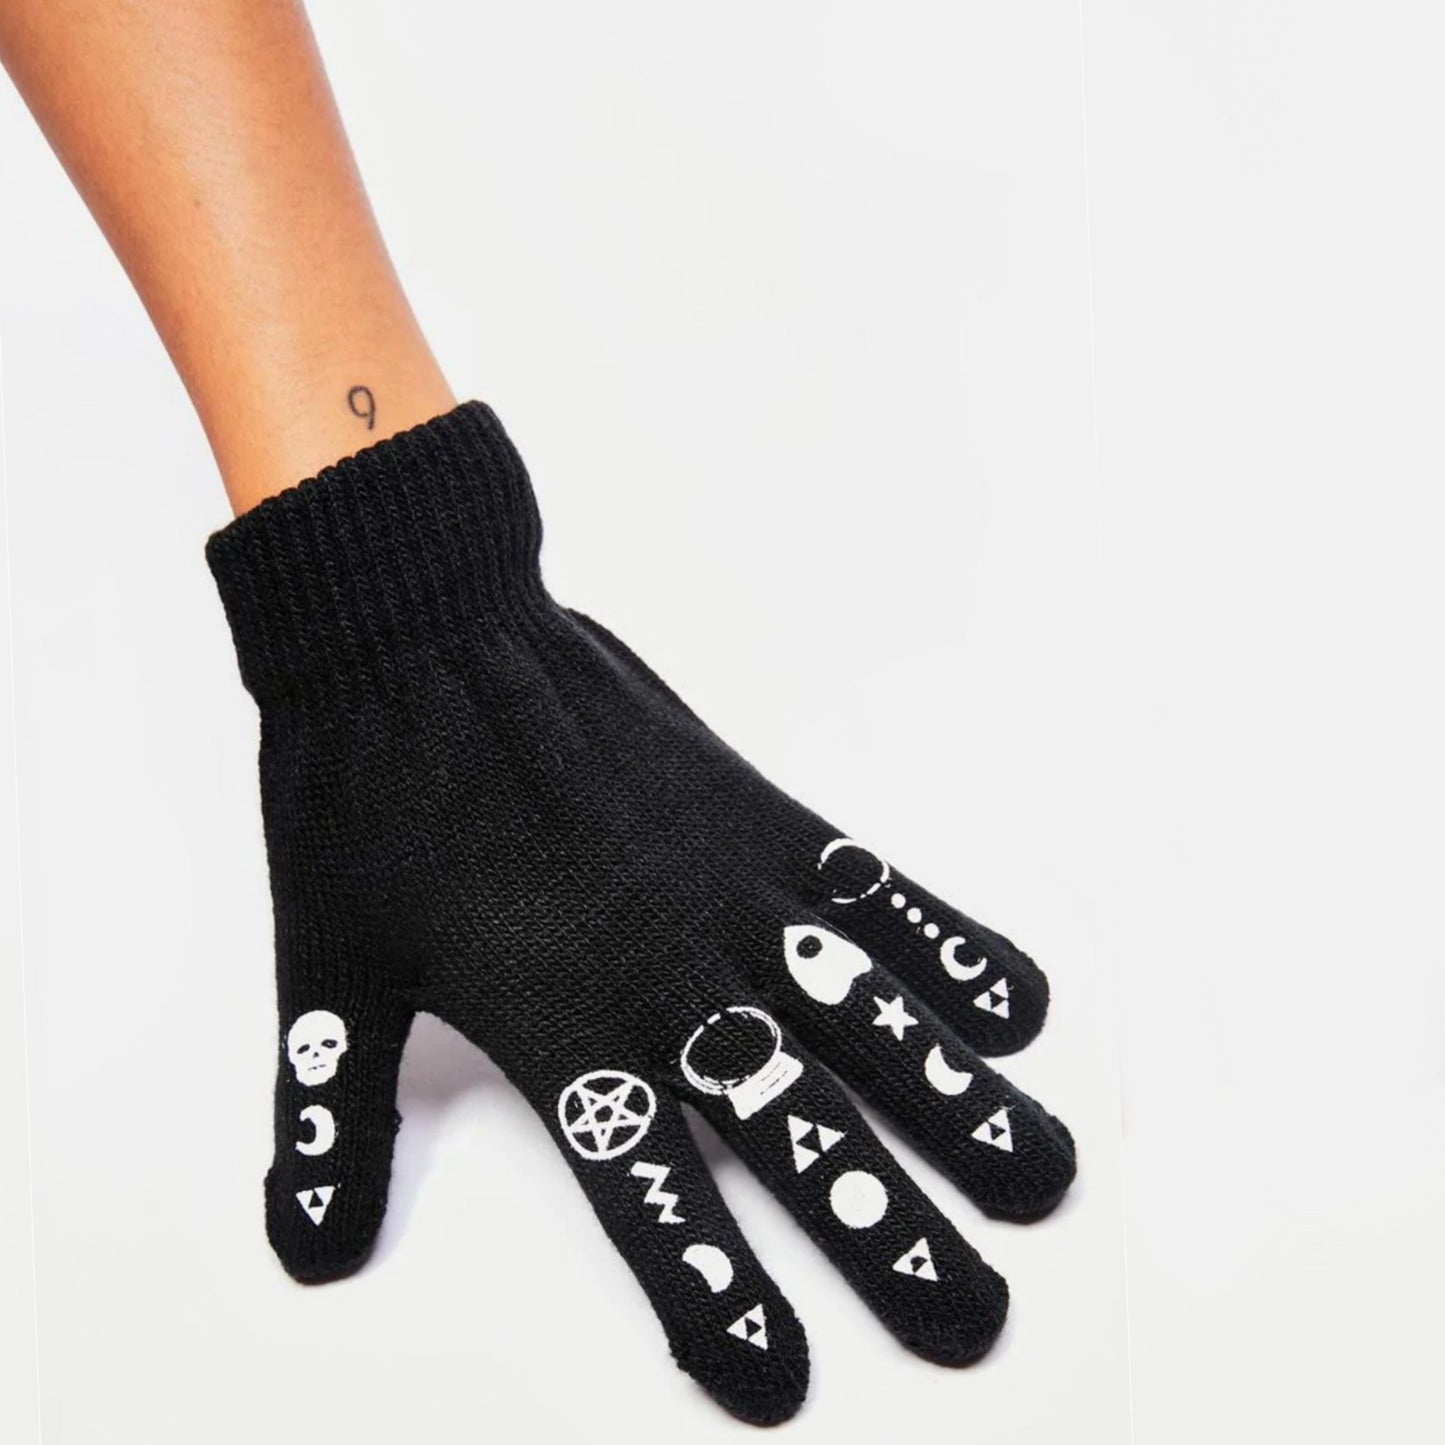 Witchy Symbols Gloves | Black White Cozy Waffle Knit - Too Fast - Gloves